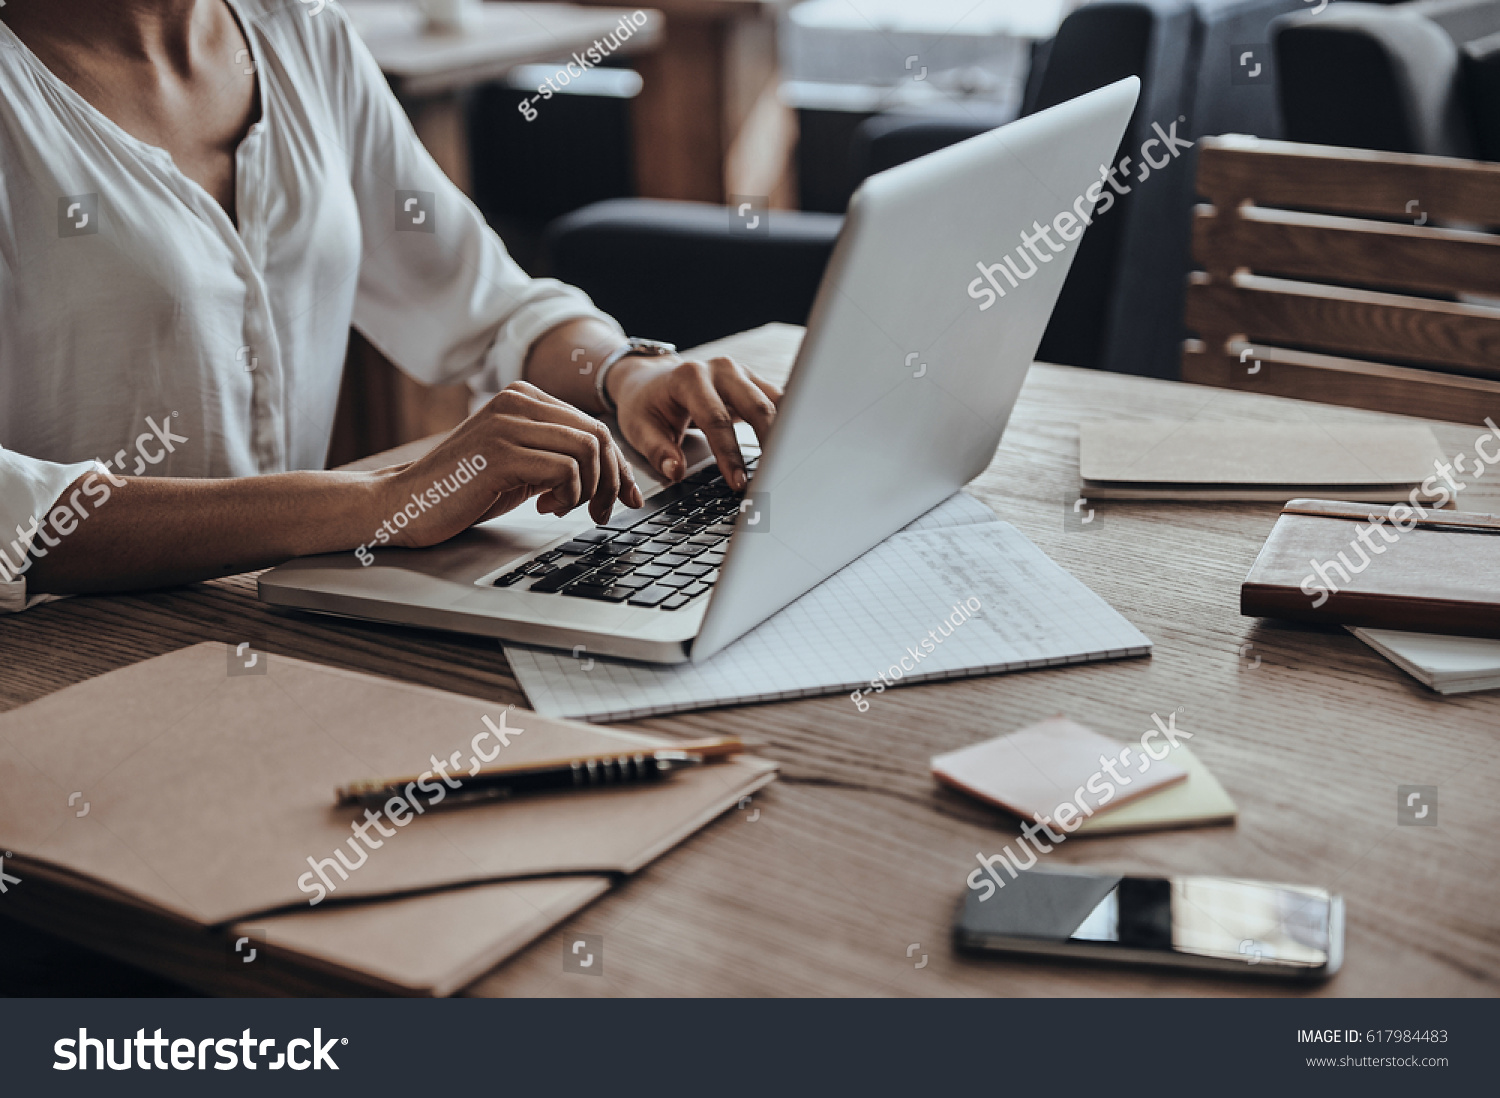 Full concentration at work. Close-up of African woman using computer while sitting in cafe #617984483